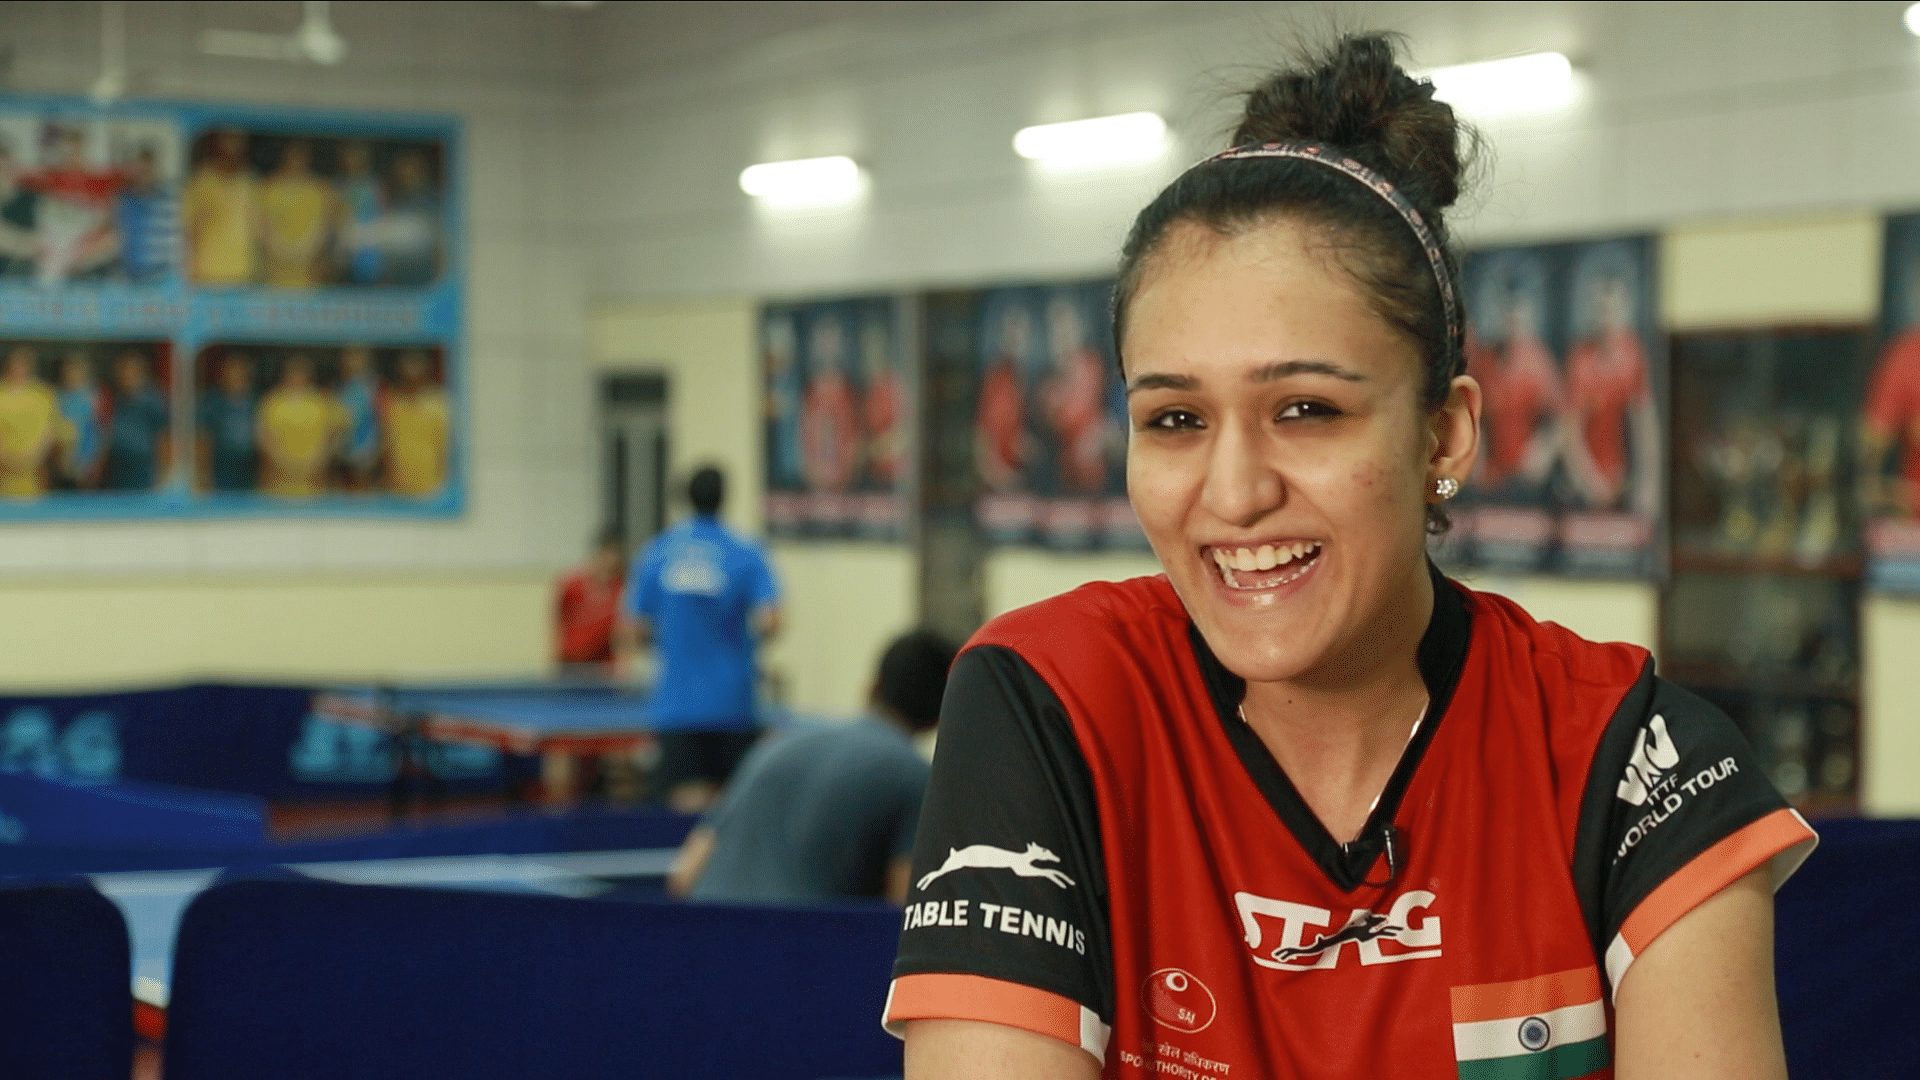 Manika Batra became the most successful Indian athlete at a single Commonwealth Games when she won four medals at the 2018 edition in Gold Coast.